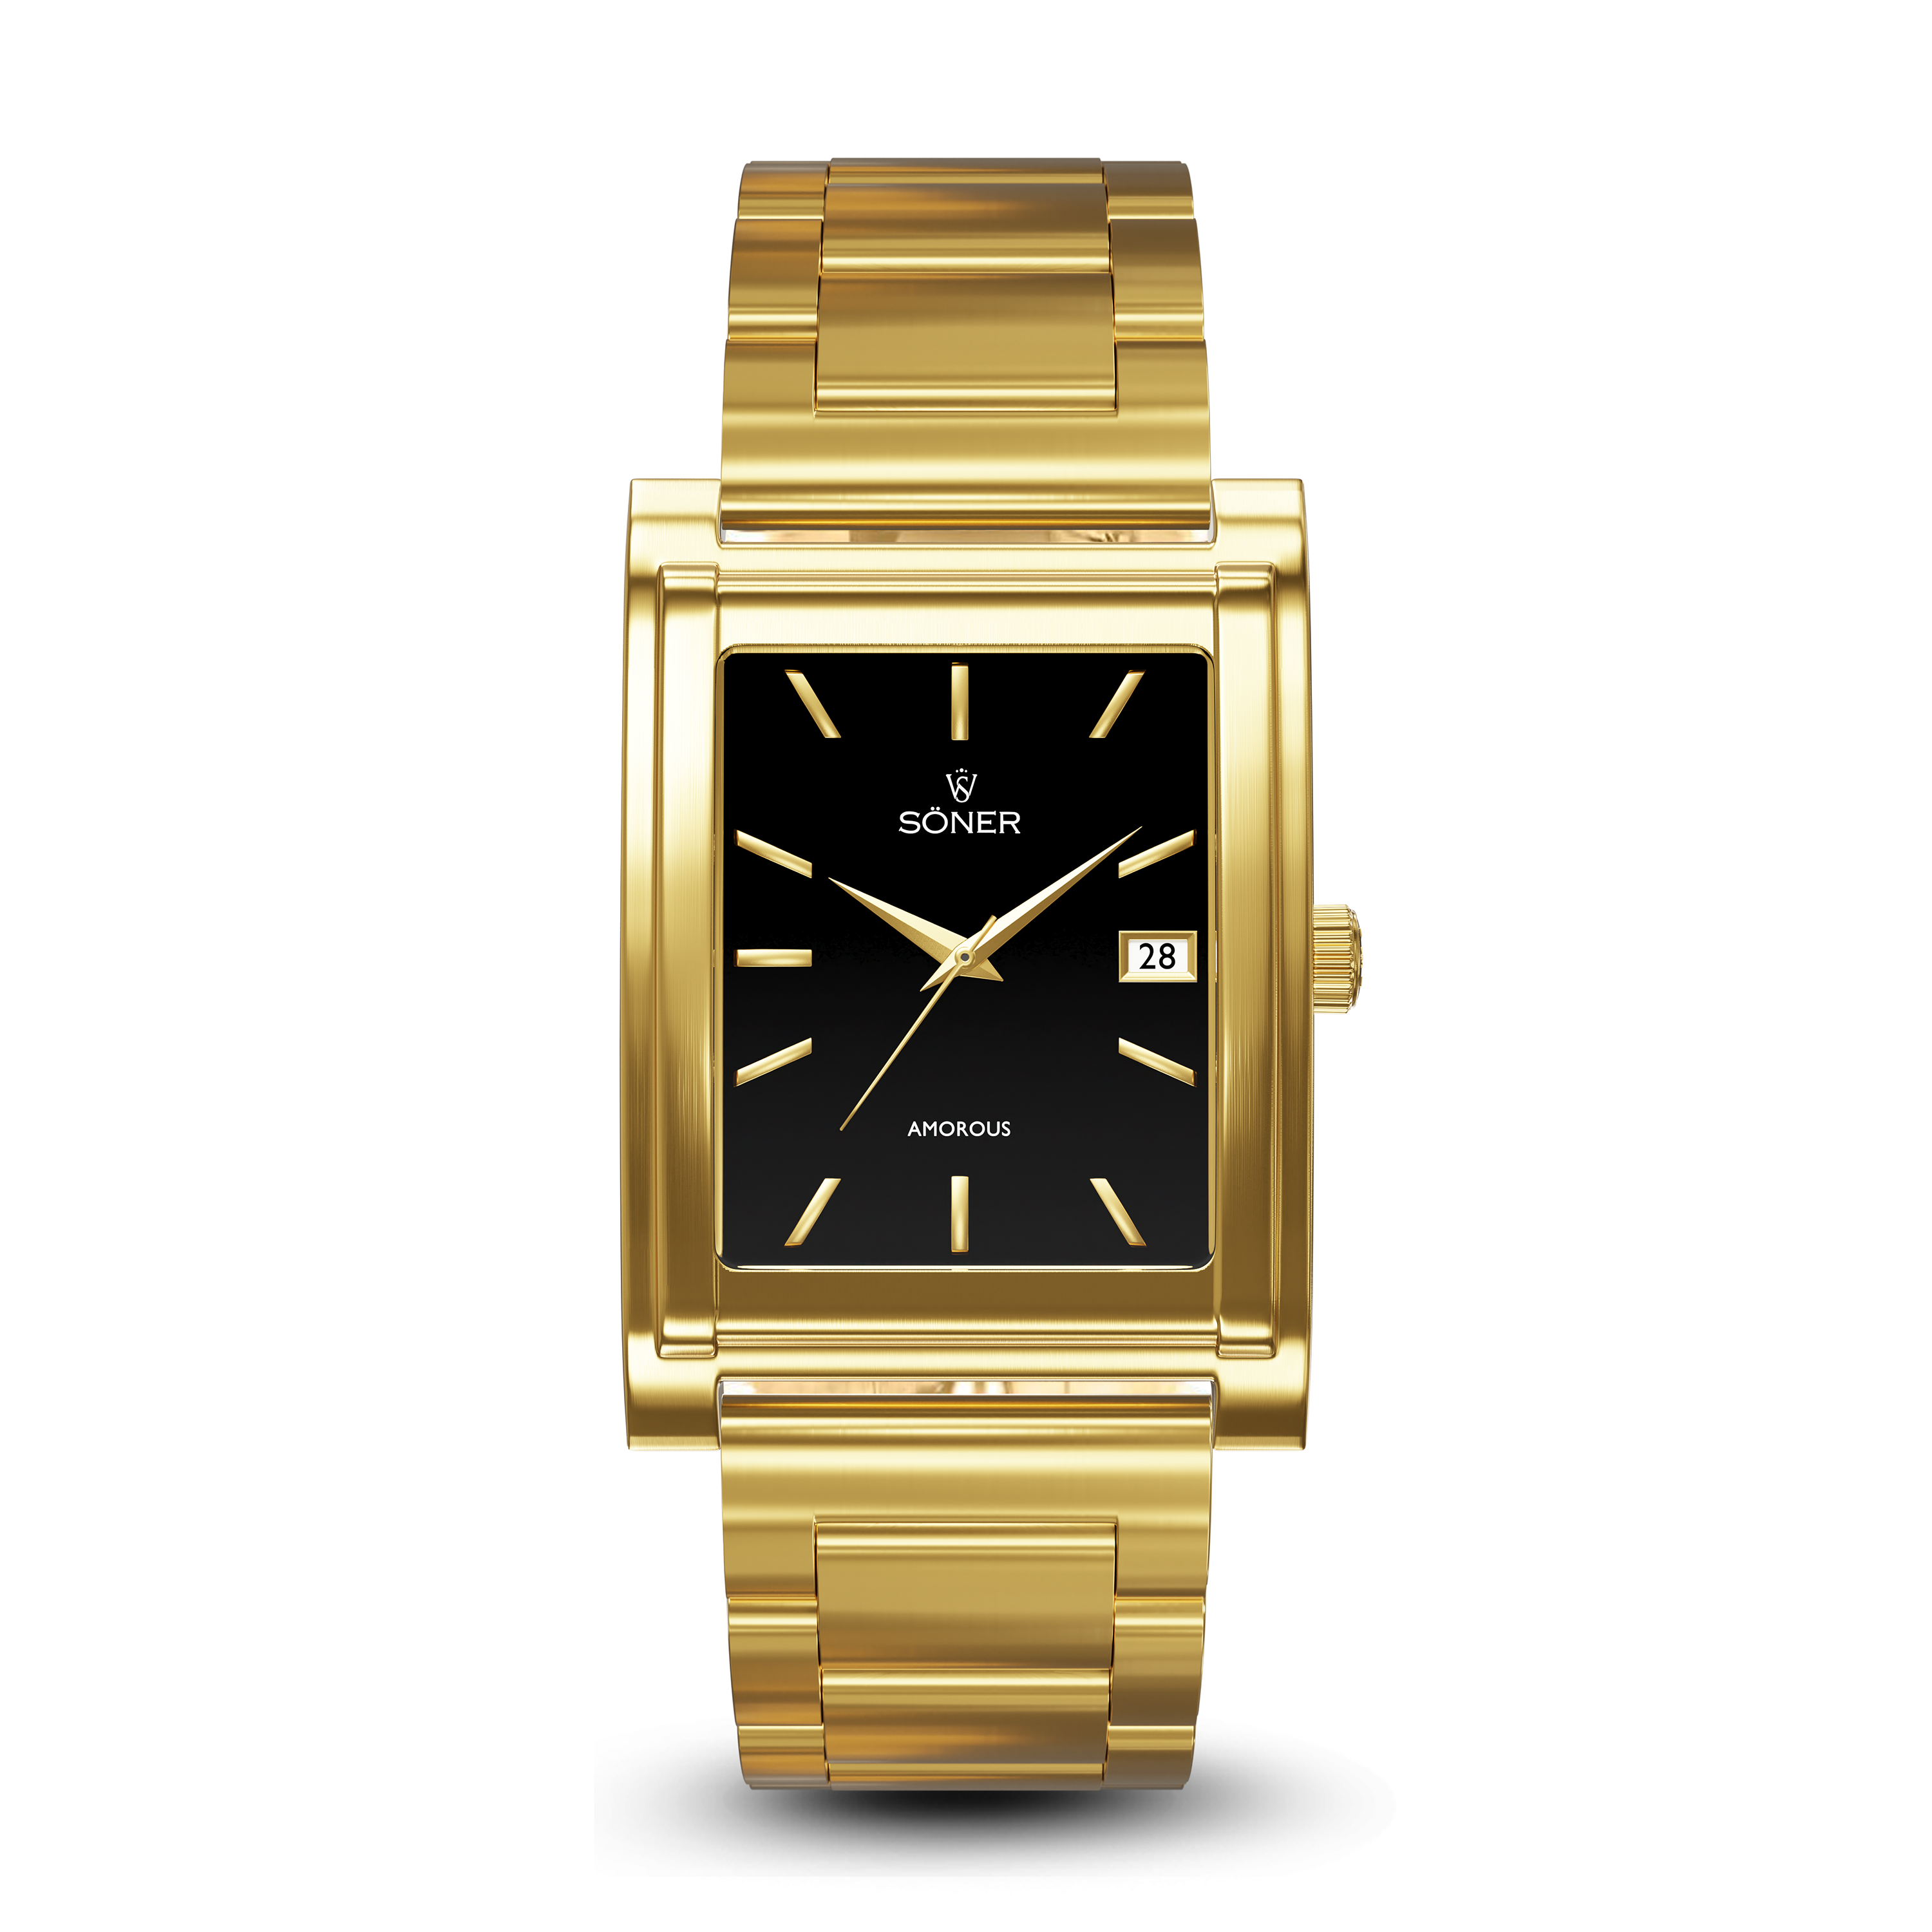 Square automatic watch, Amorous Milano with black dial - steel bracelet front view